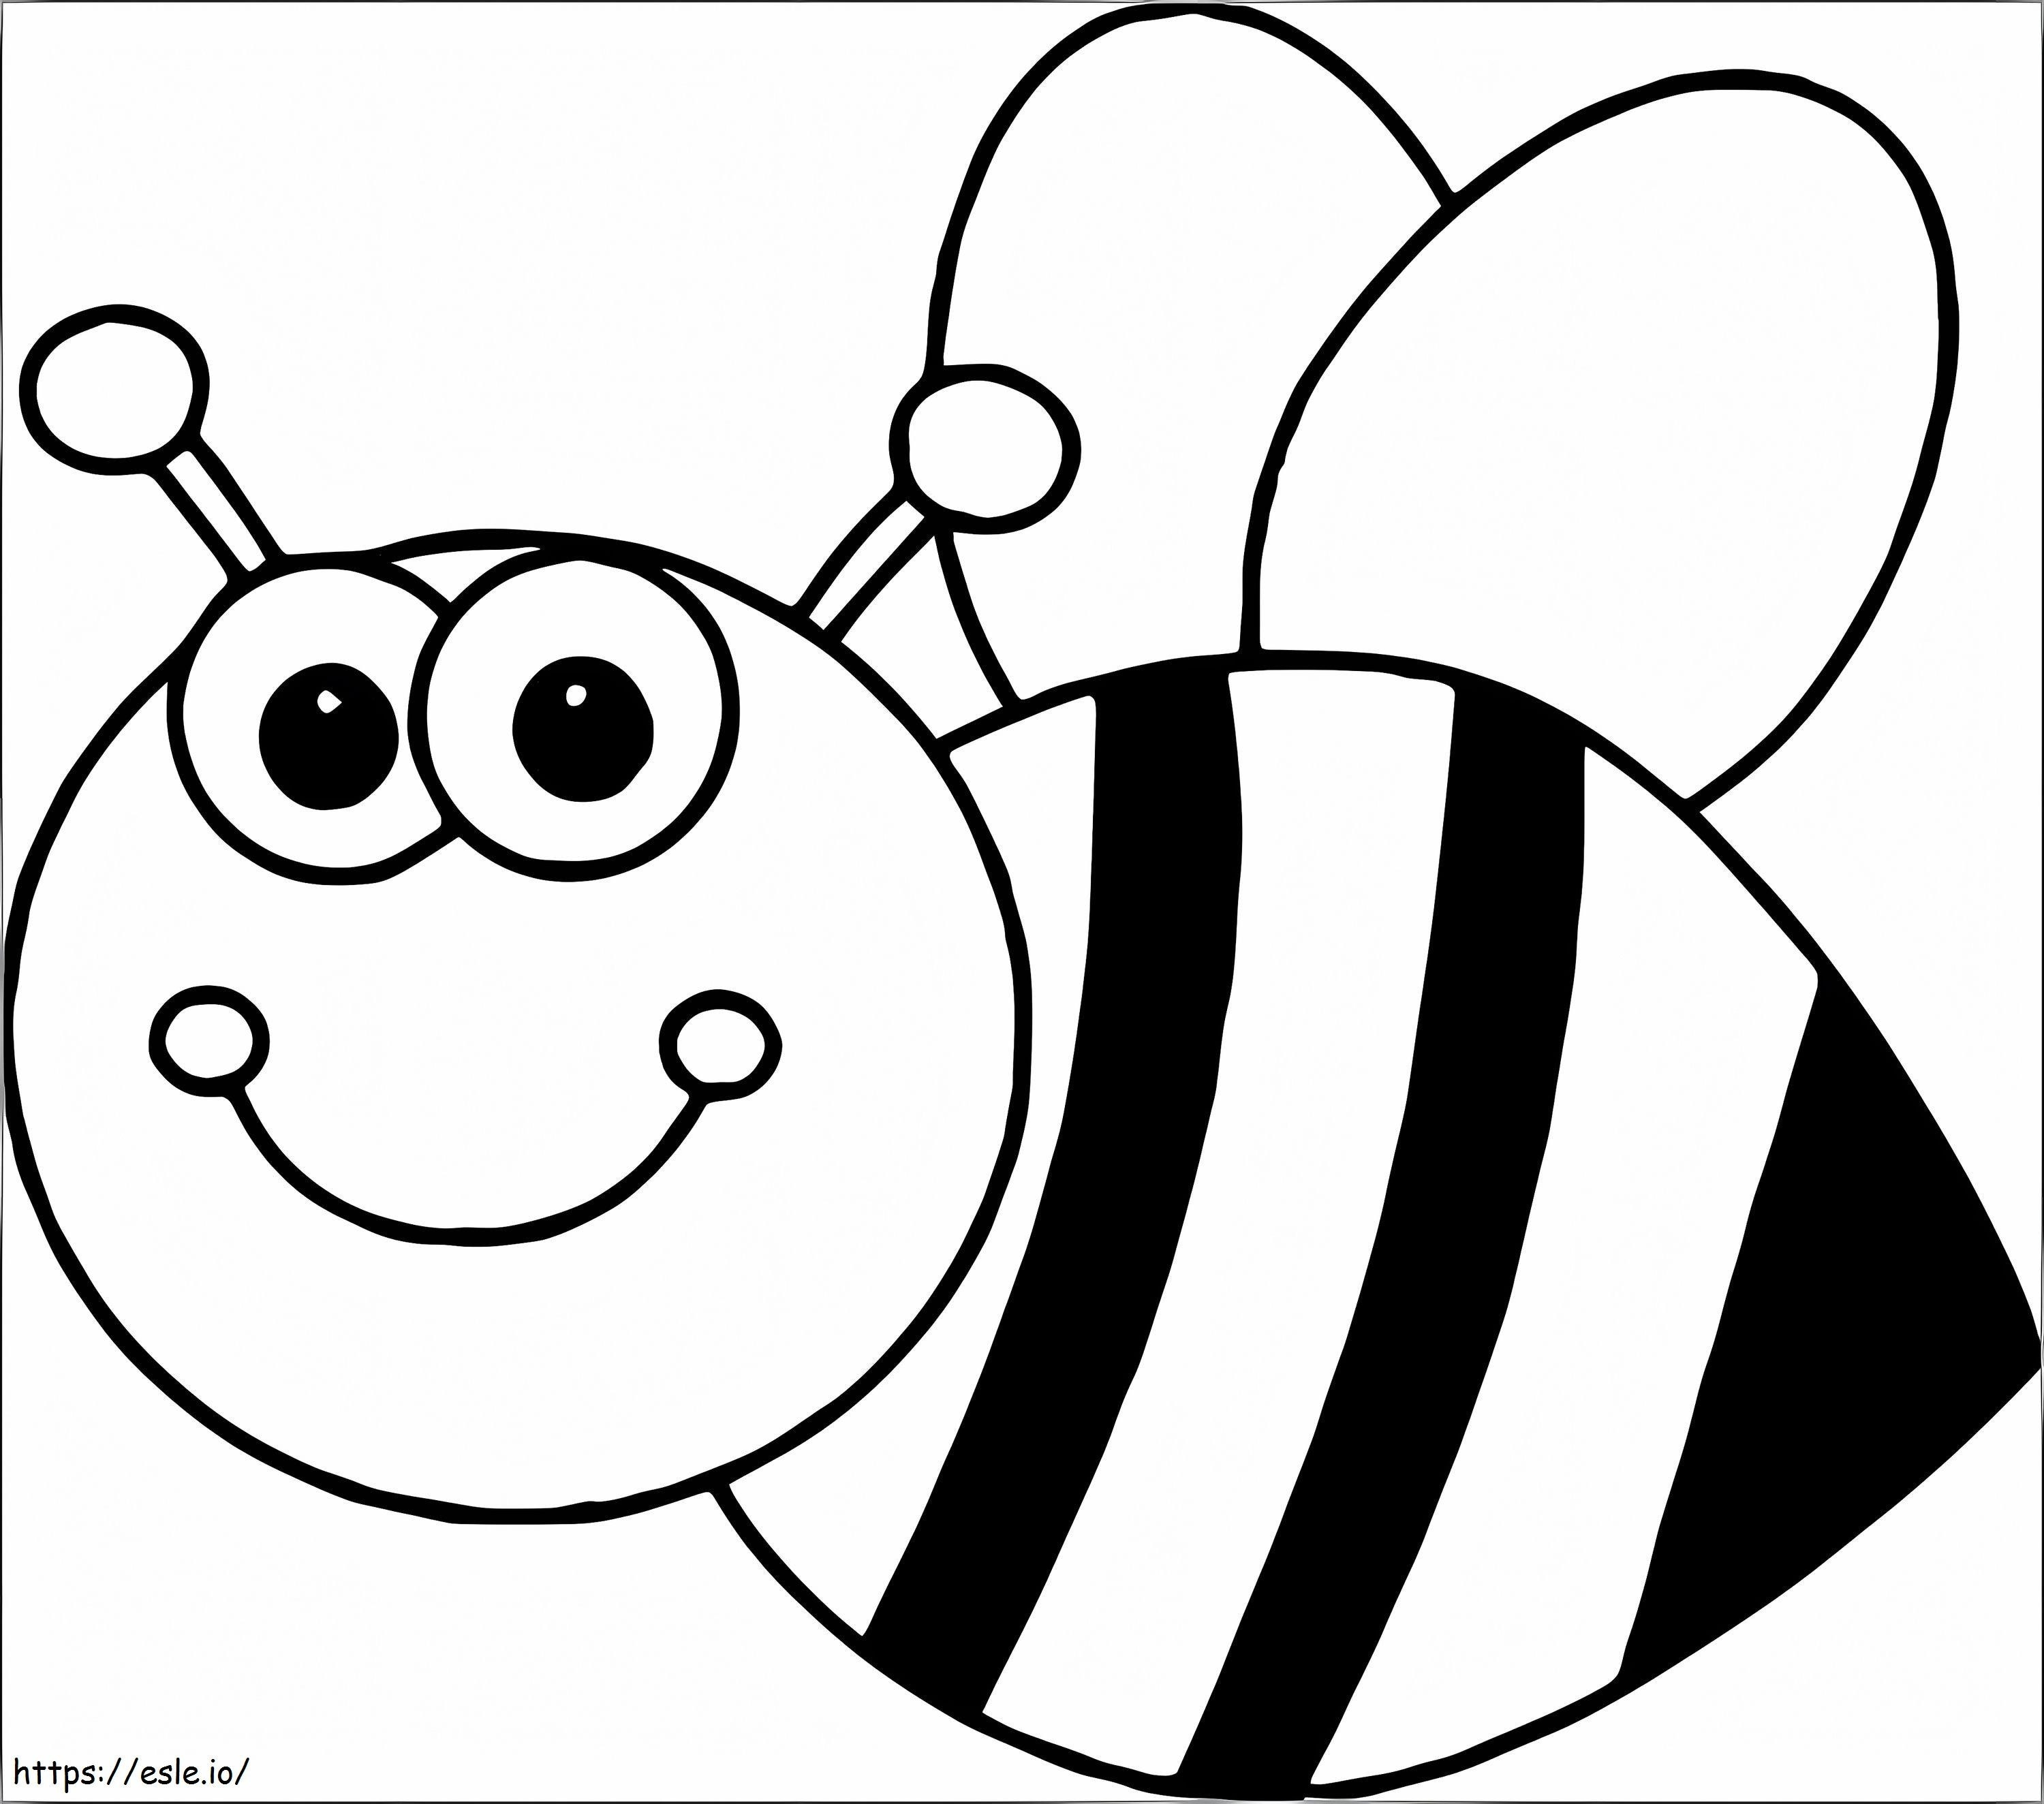 Awesome Bee coloring page